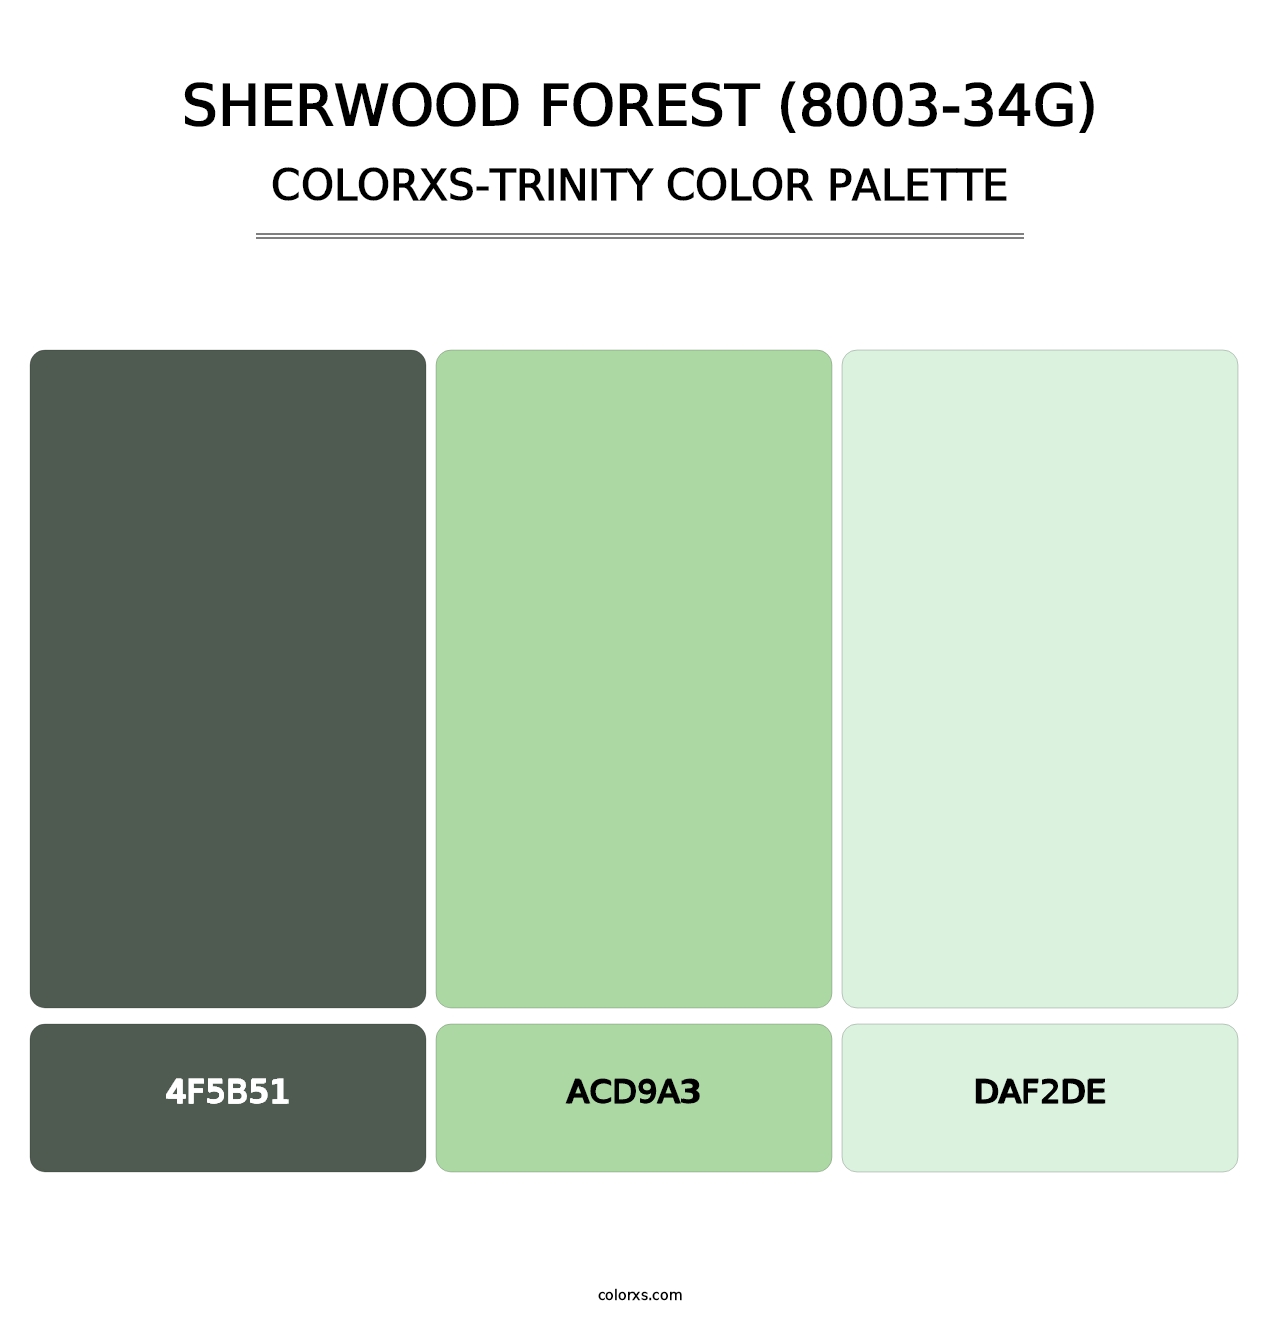 Sherwood Forest (8003-34G) - Colorxs Trinity Palette